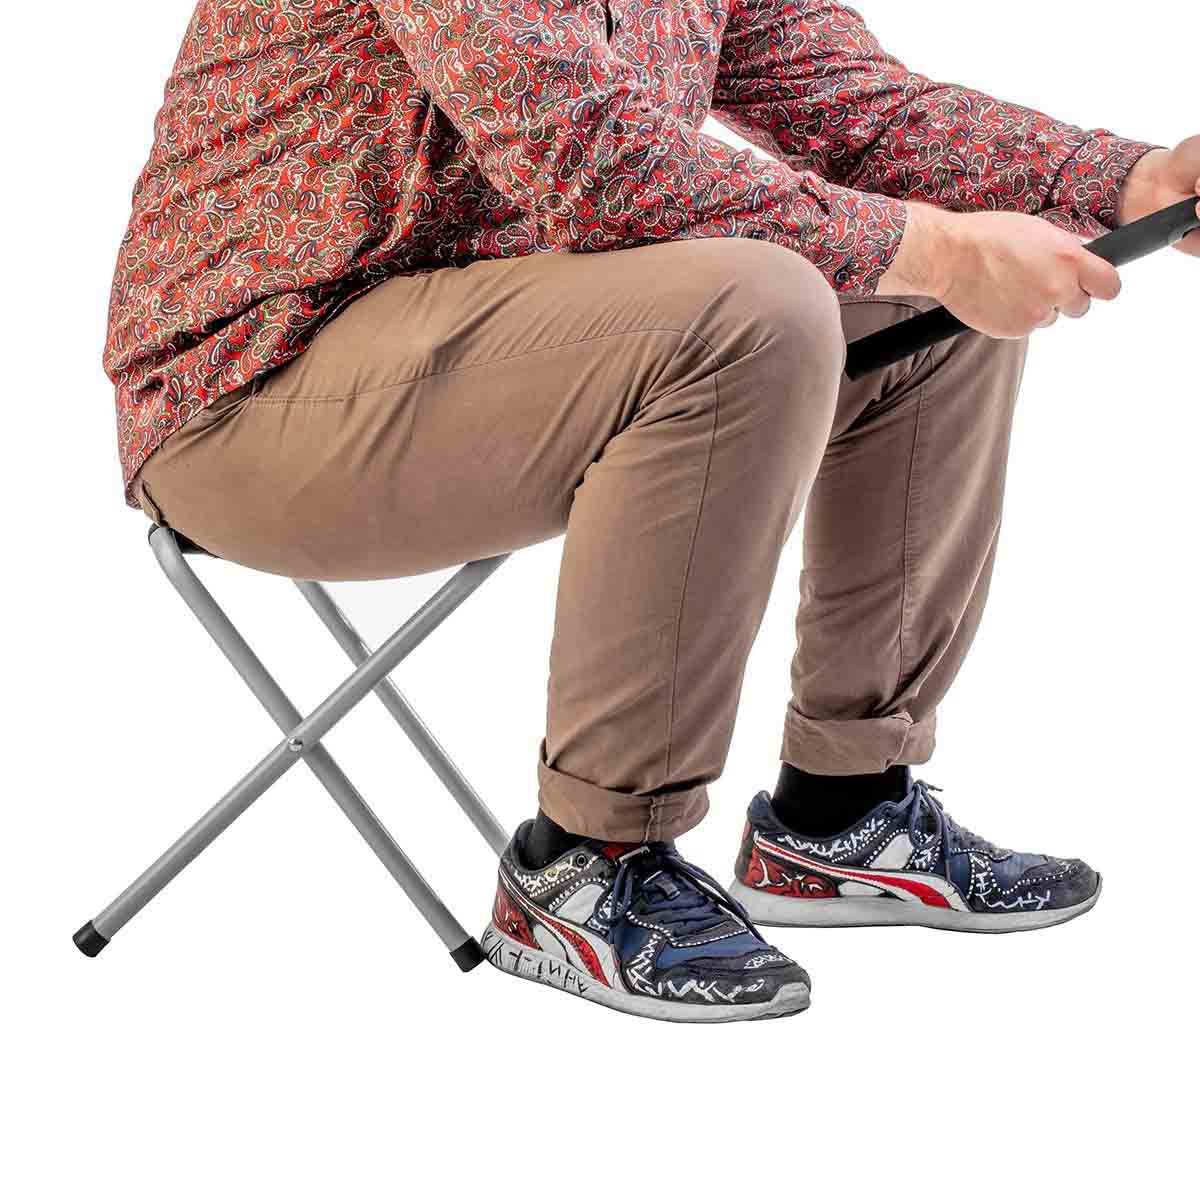 Lightweight Folding Chair for Camping and Outdoor